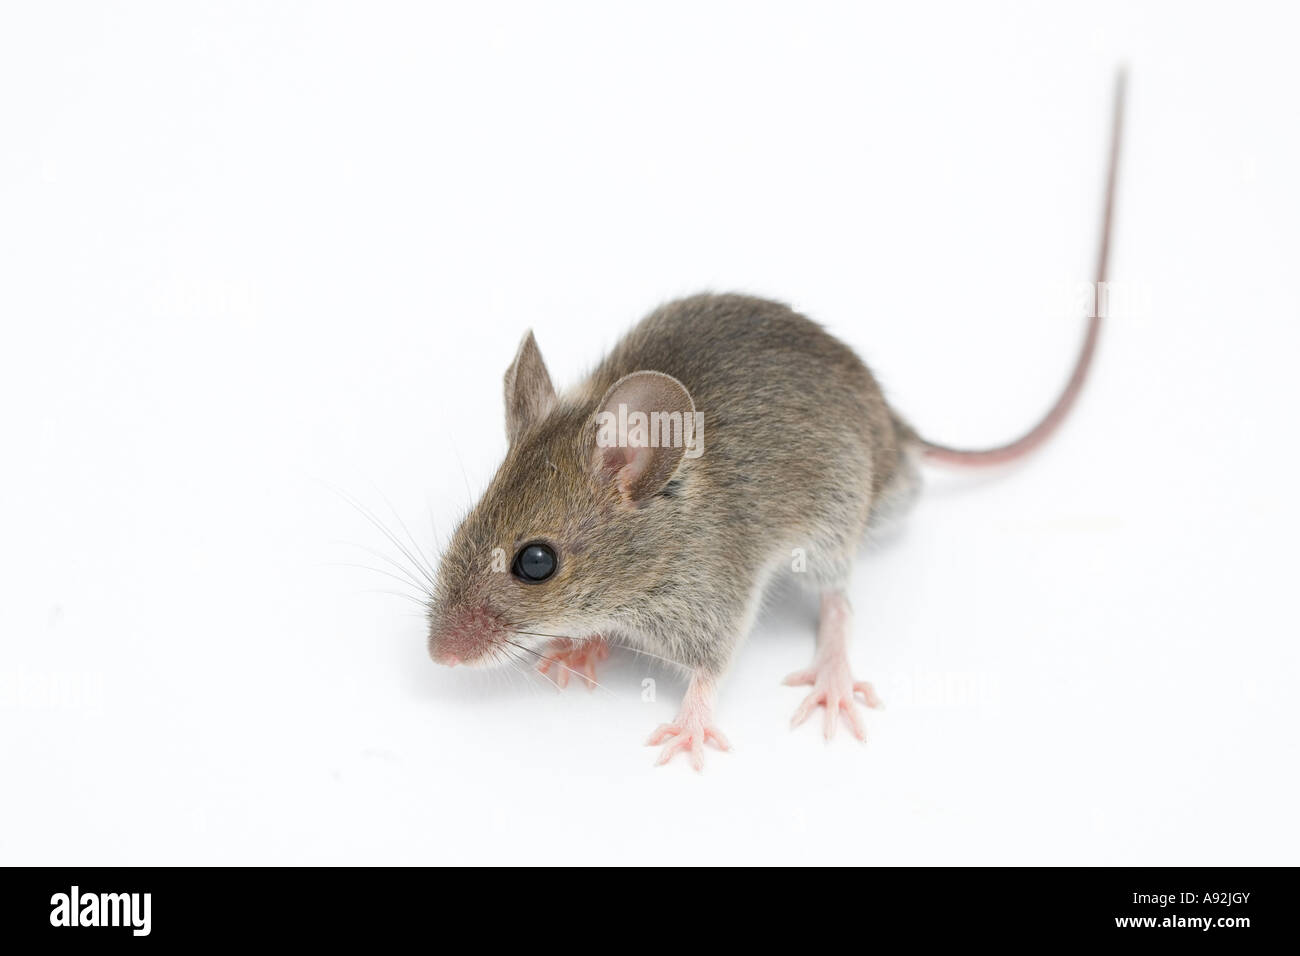 House mouse (mus musculus) Stock Photo